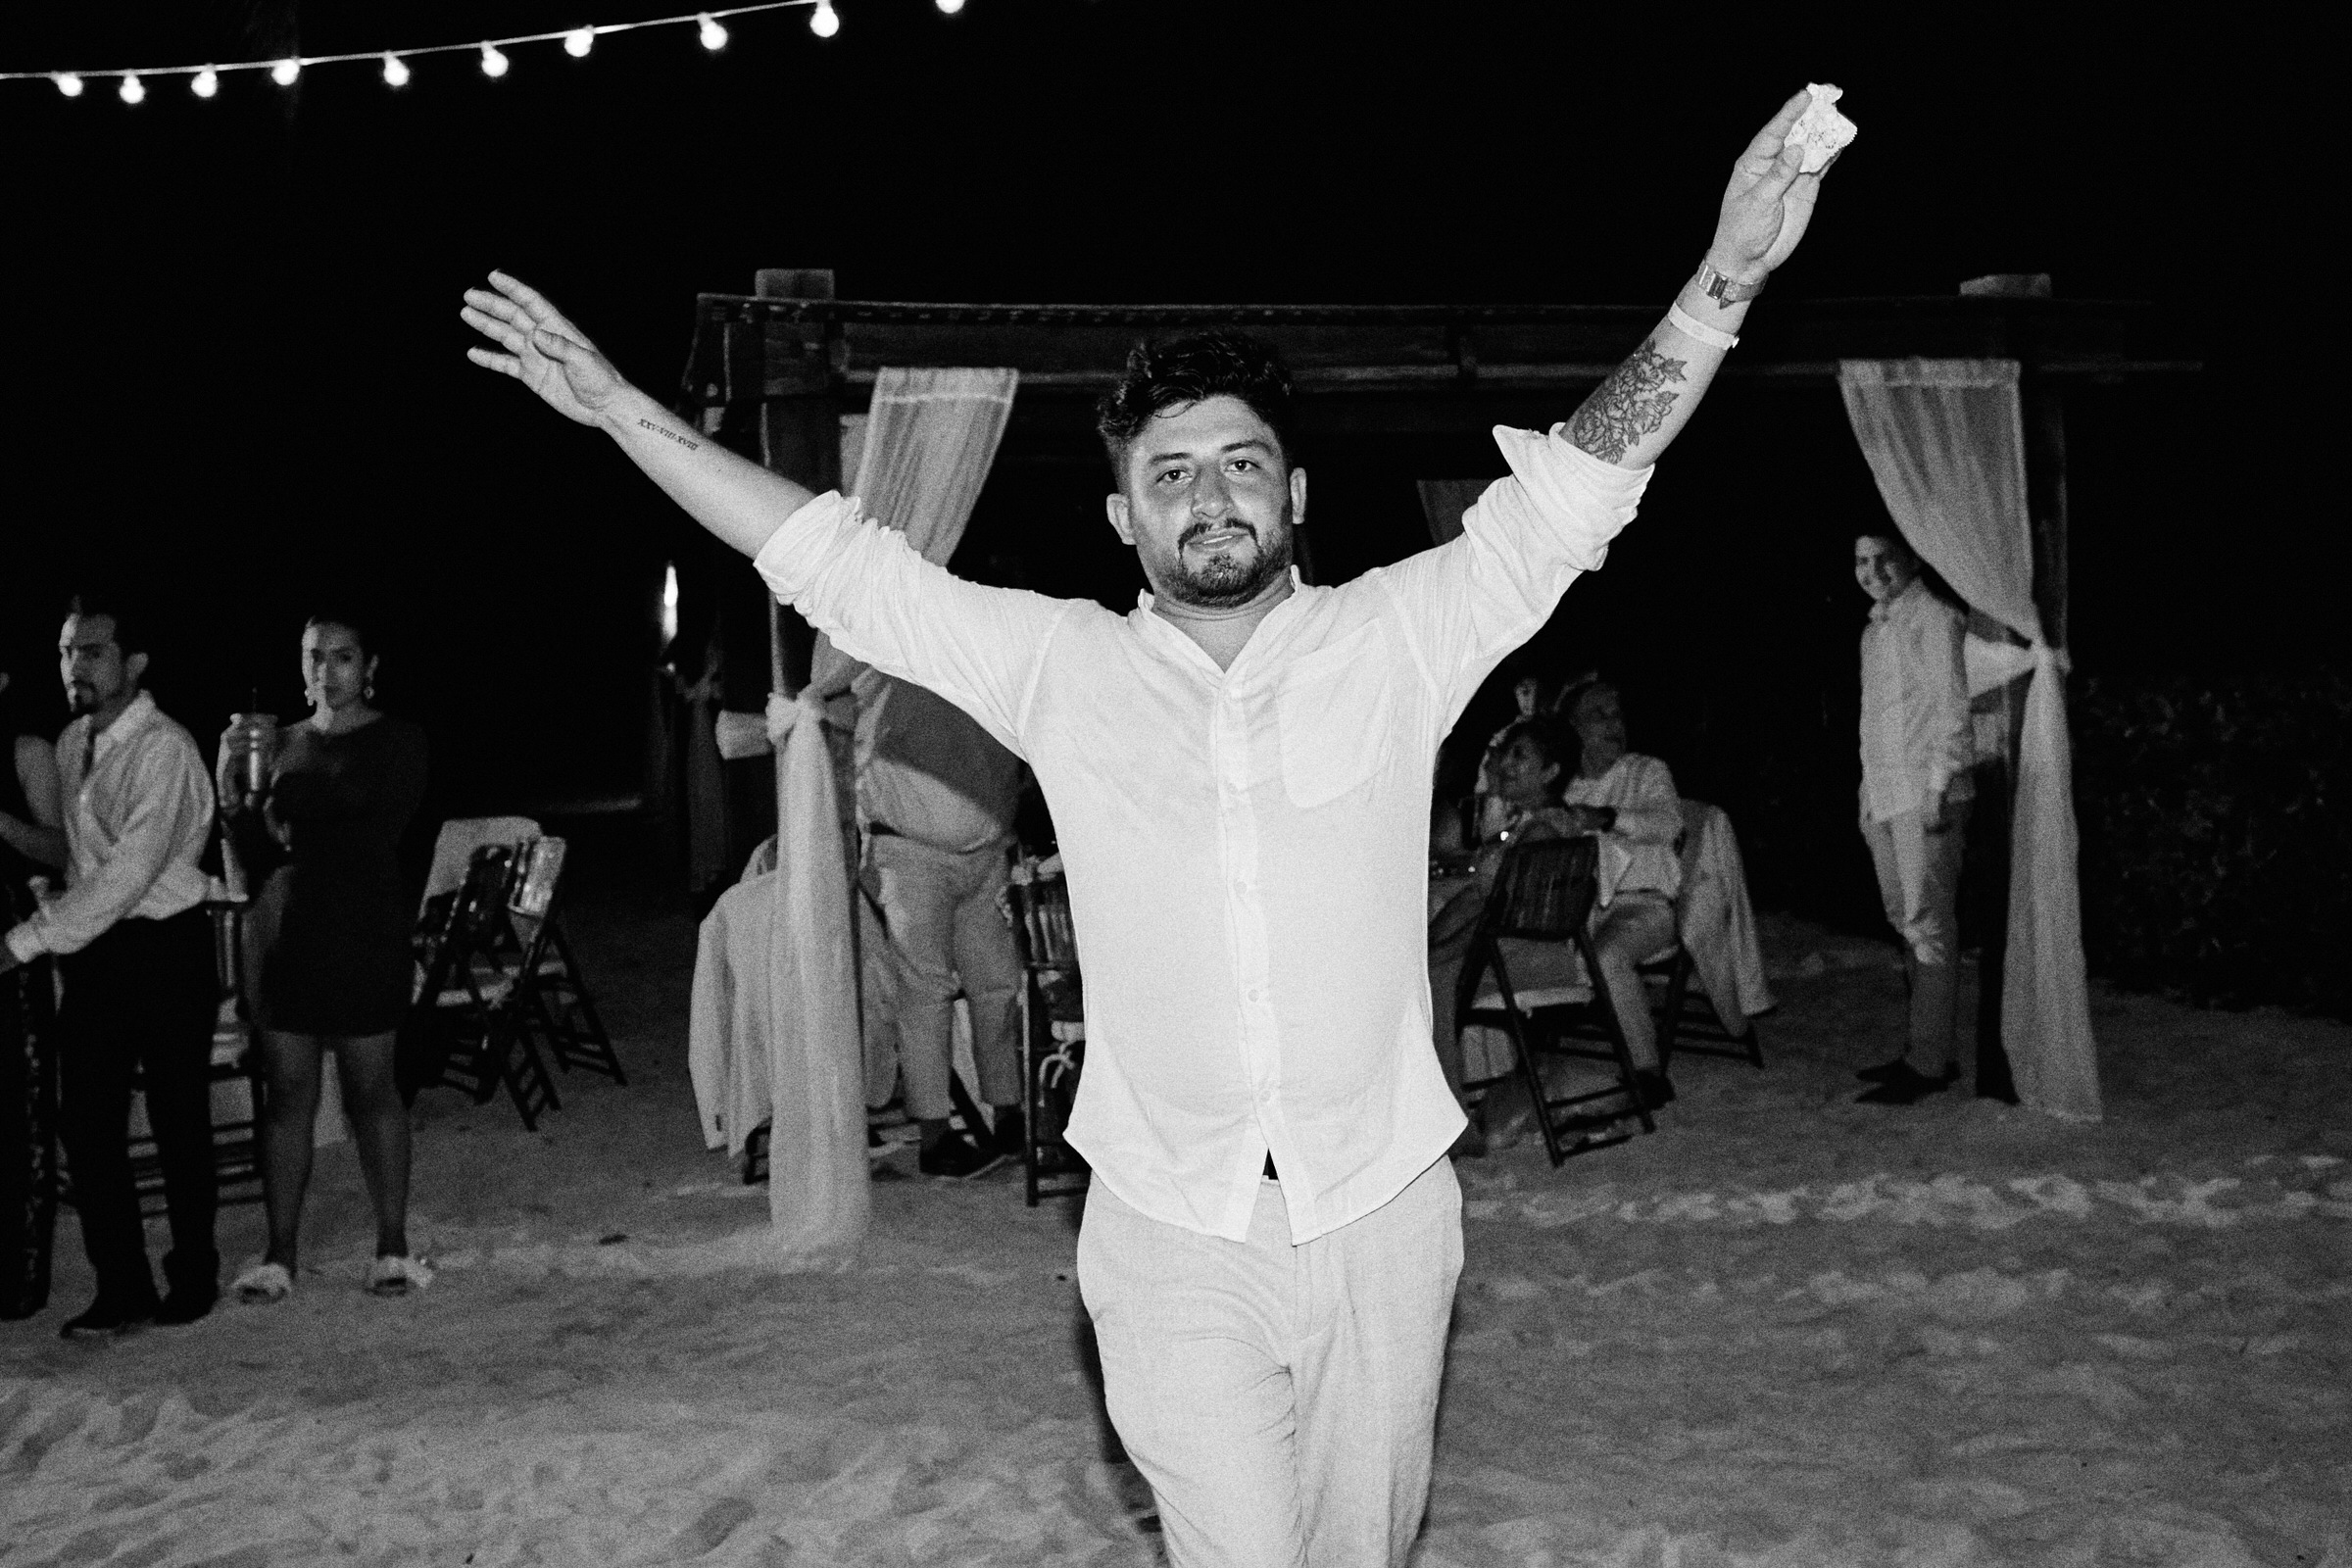 Groom at Wedding Reception in Black and White